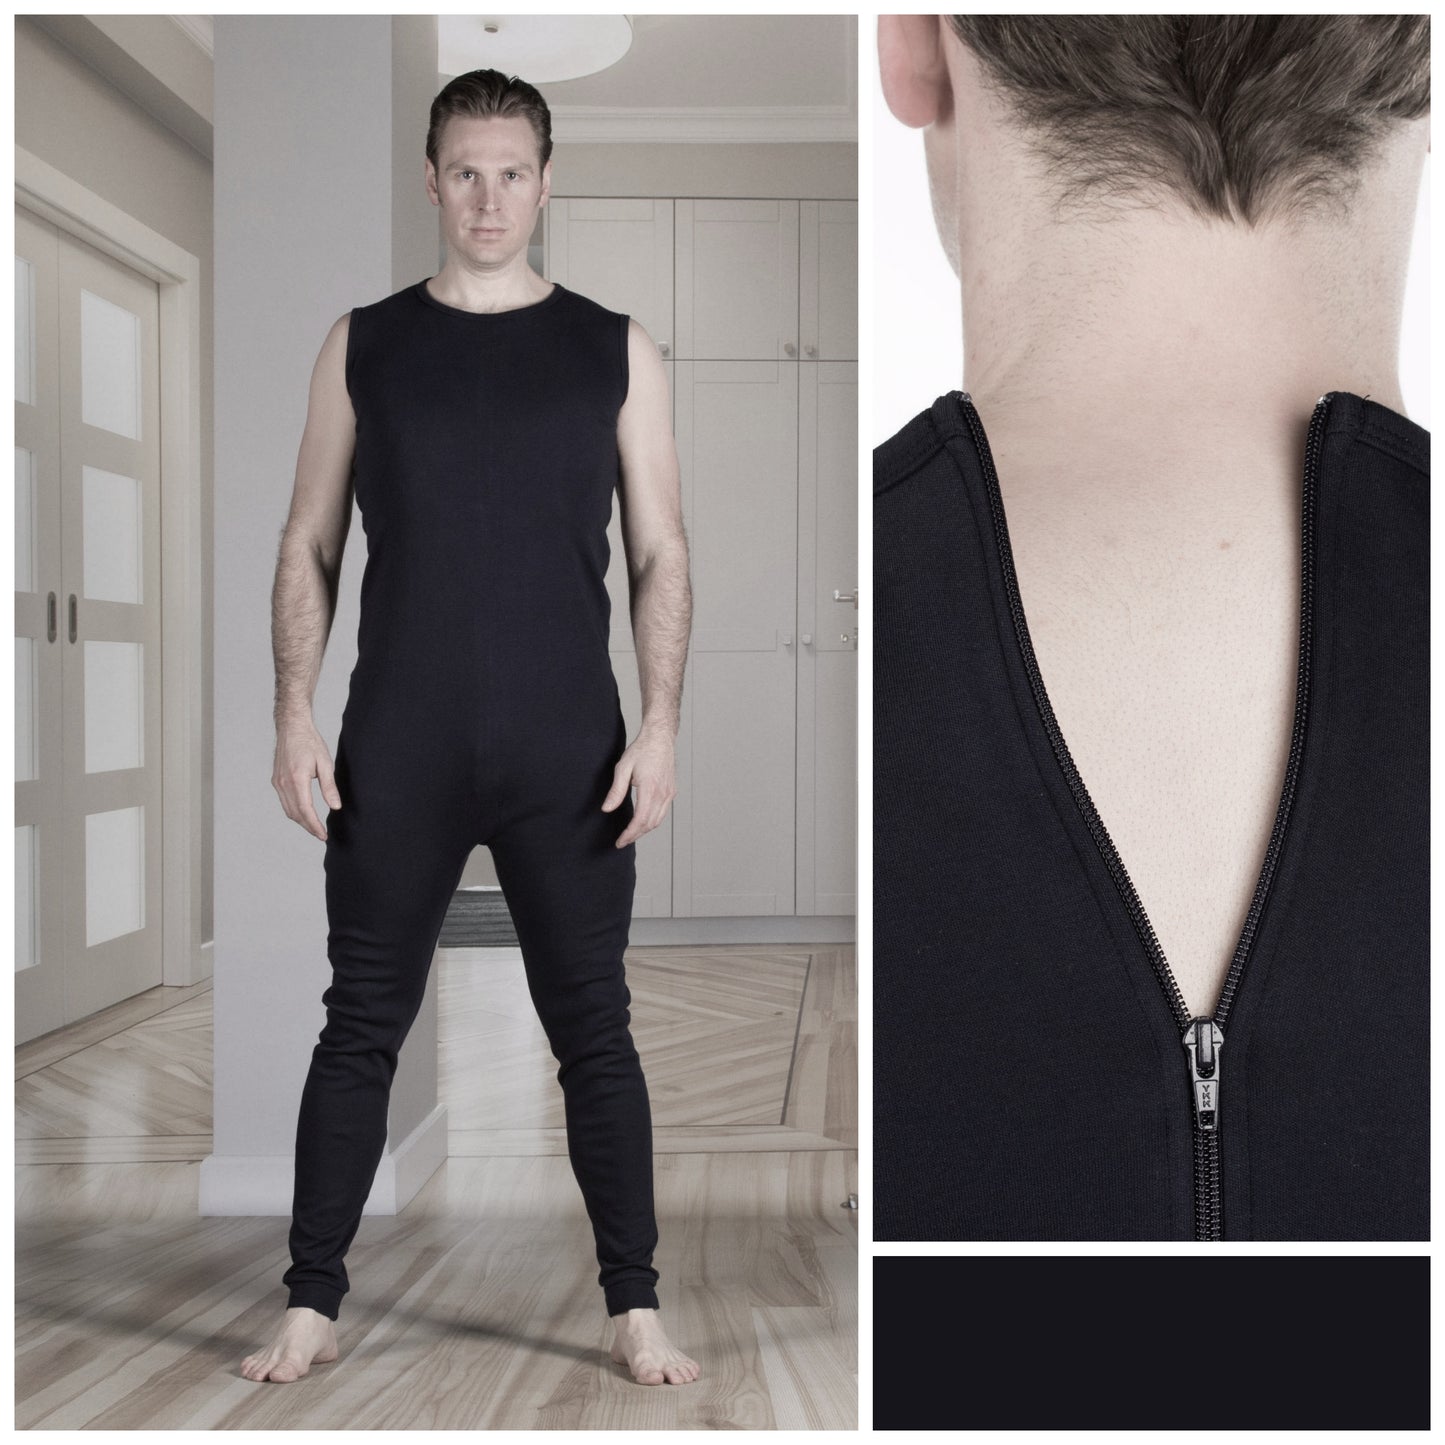 Unisex Bodysuit: Sleeveless With a Zip up The Back (4322)